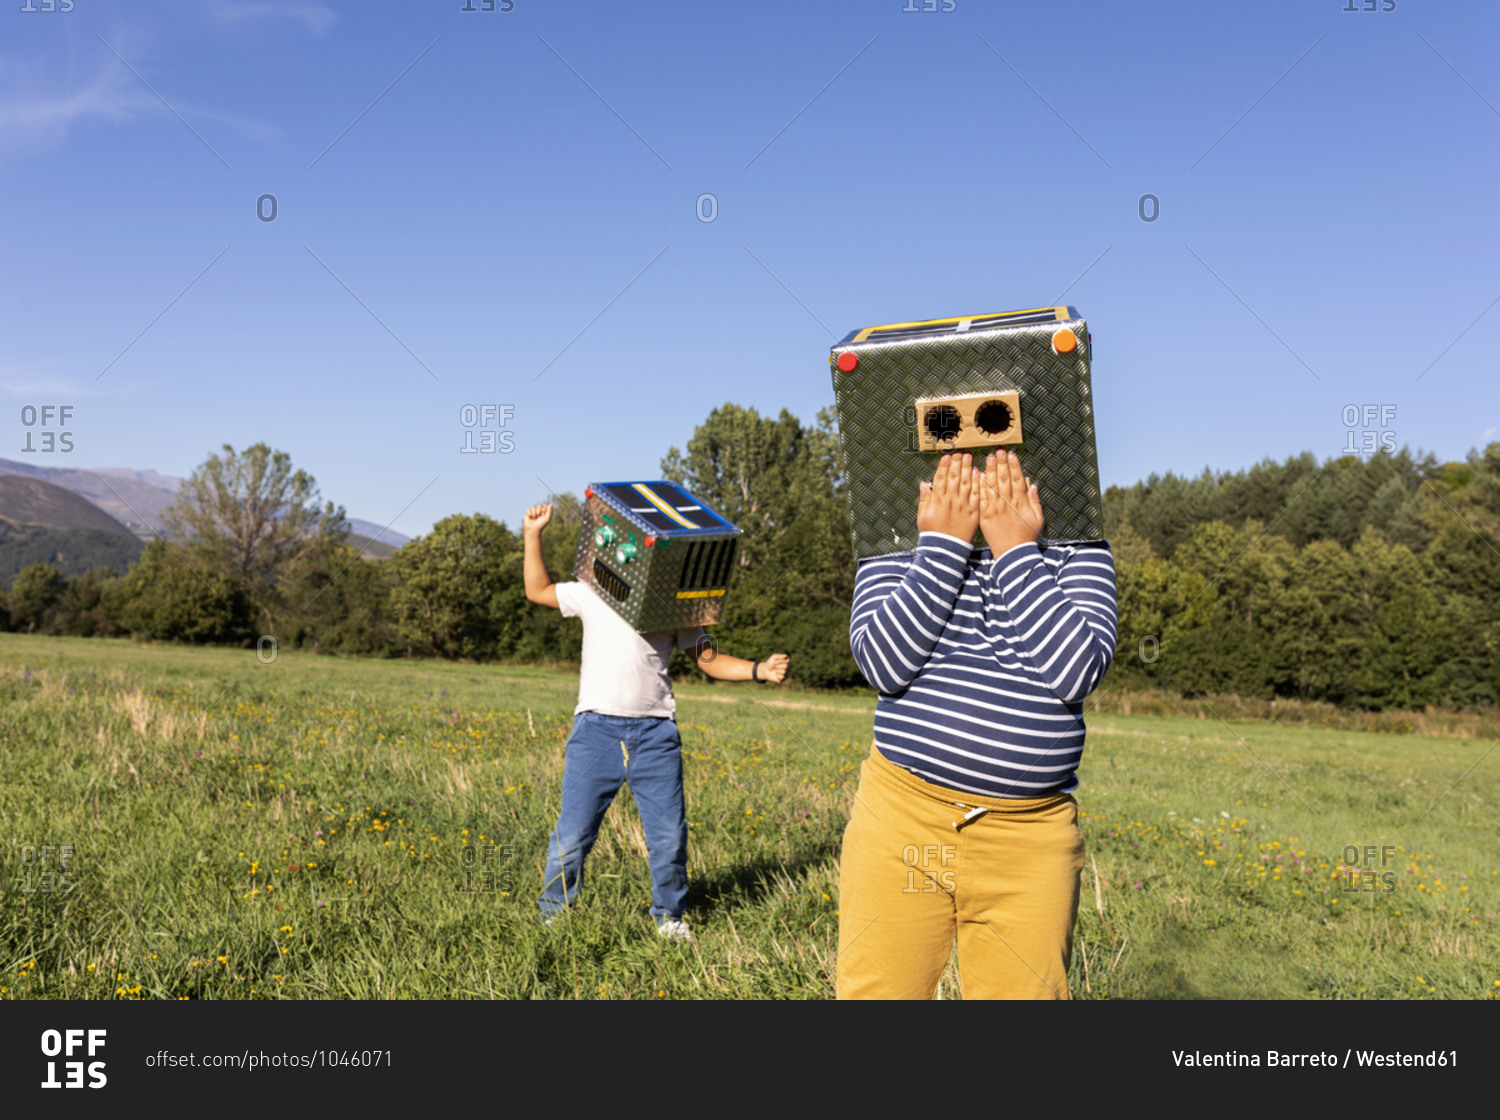 Boys playing with robot cardboard box while standing in meadow